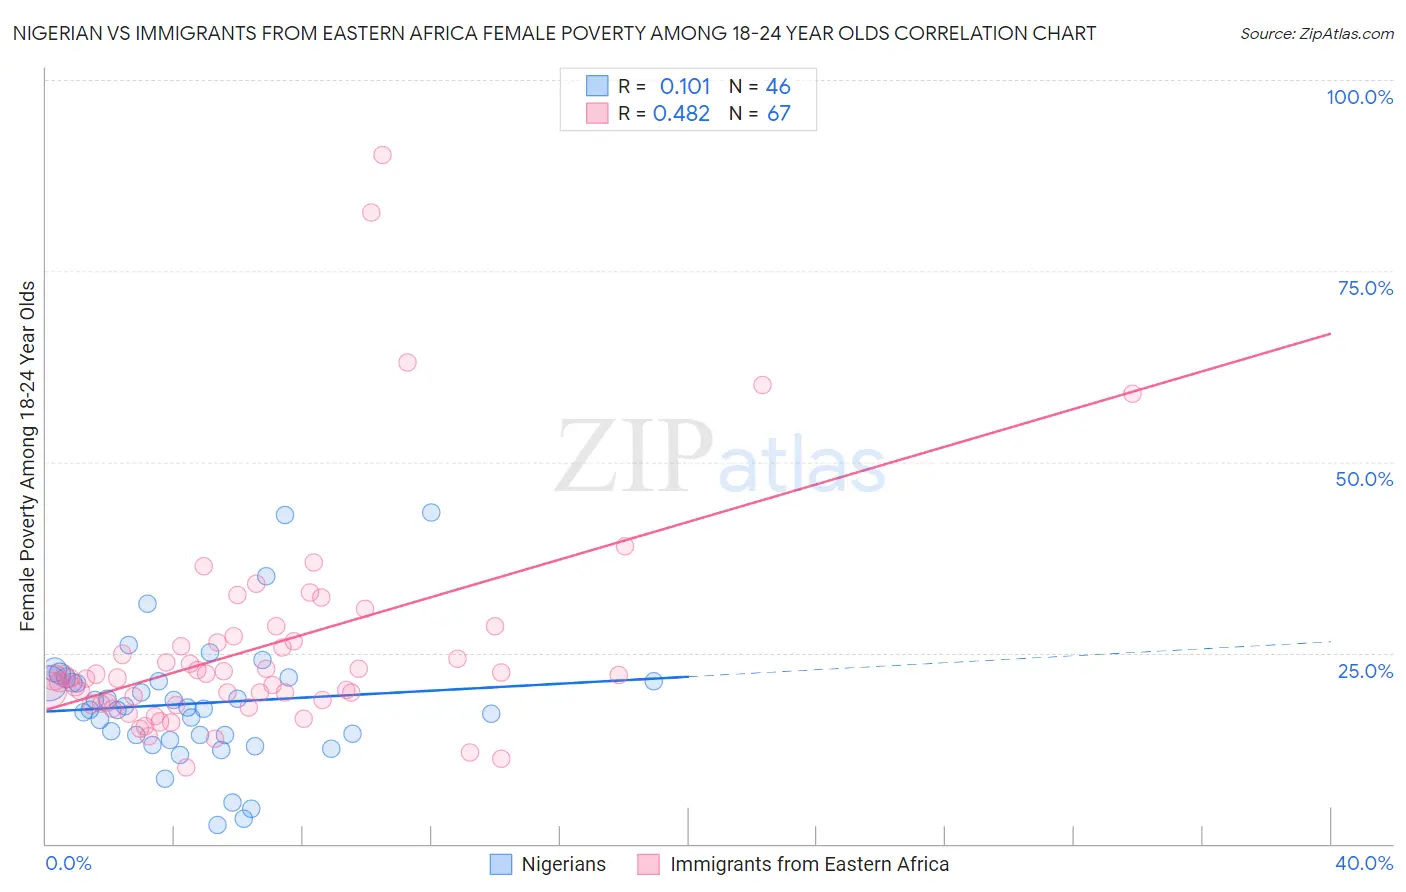 Nigerian vs Immigrants from Eastern Africa Female Poverty Among 18-24 Year Olds